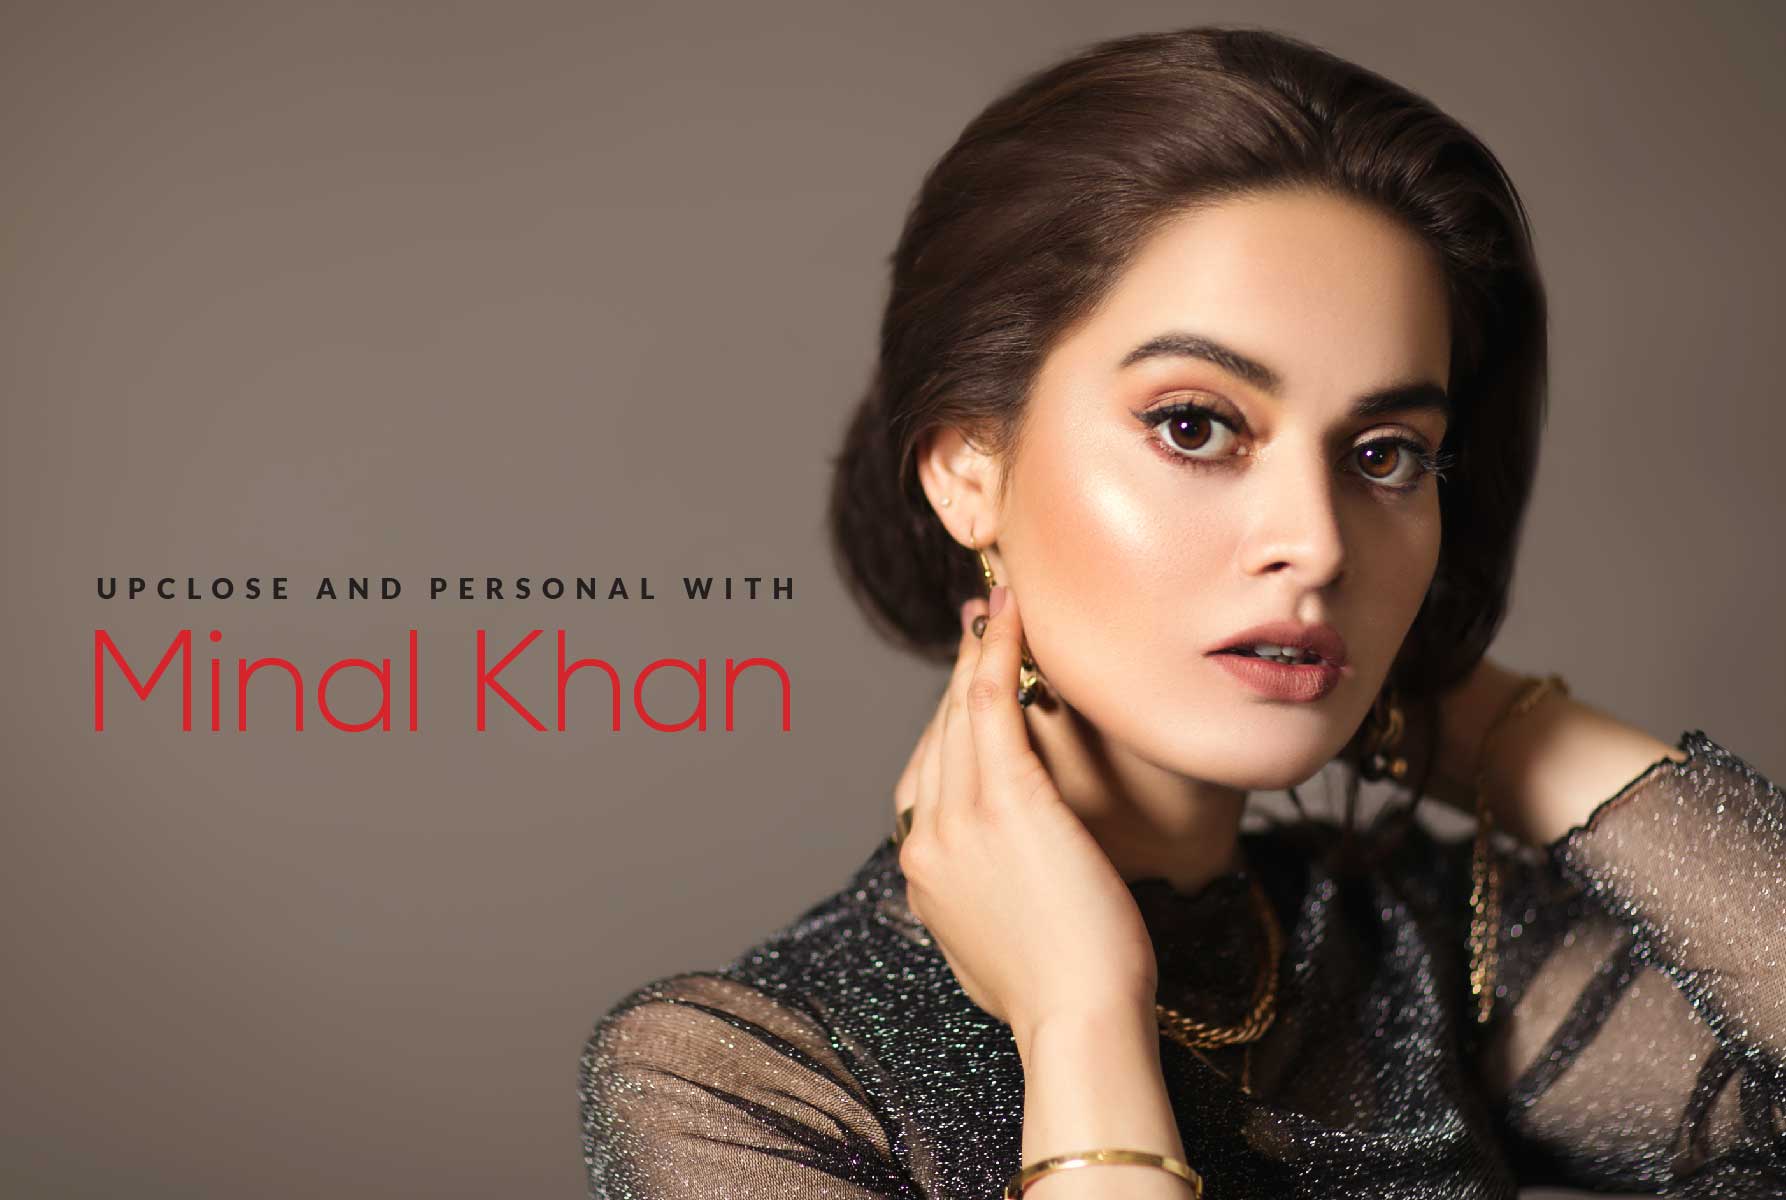 Upclose and personal with Minal Khan